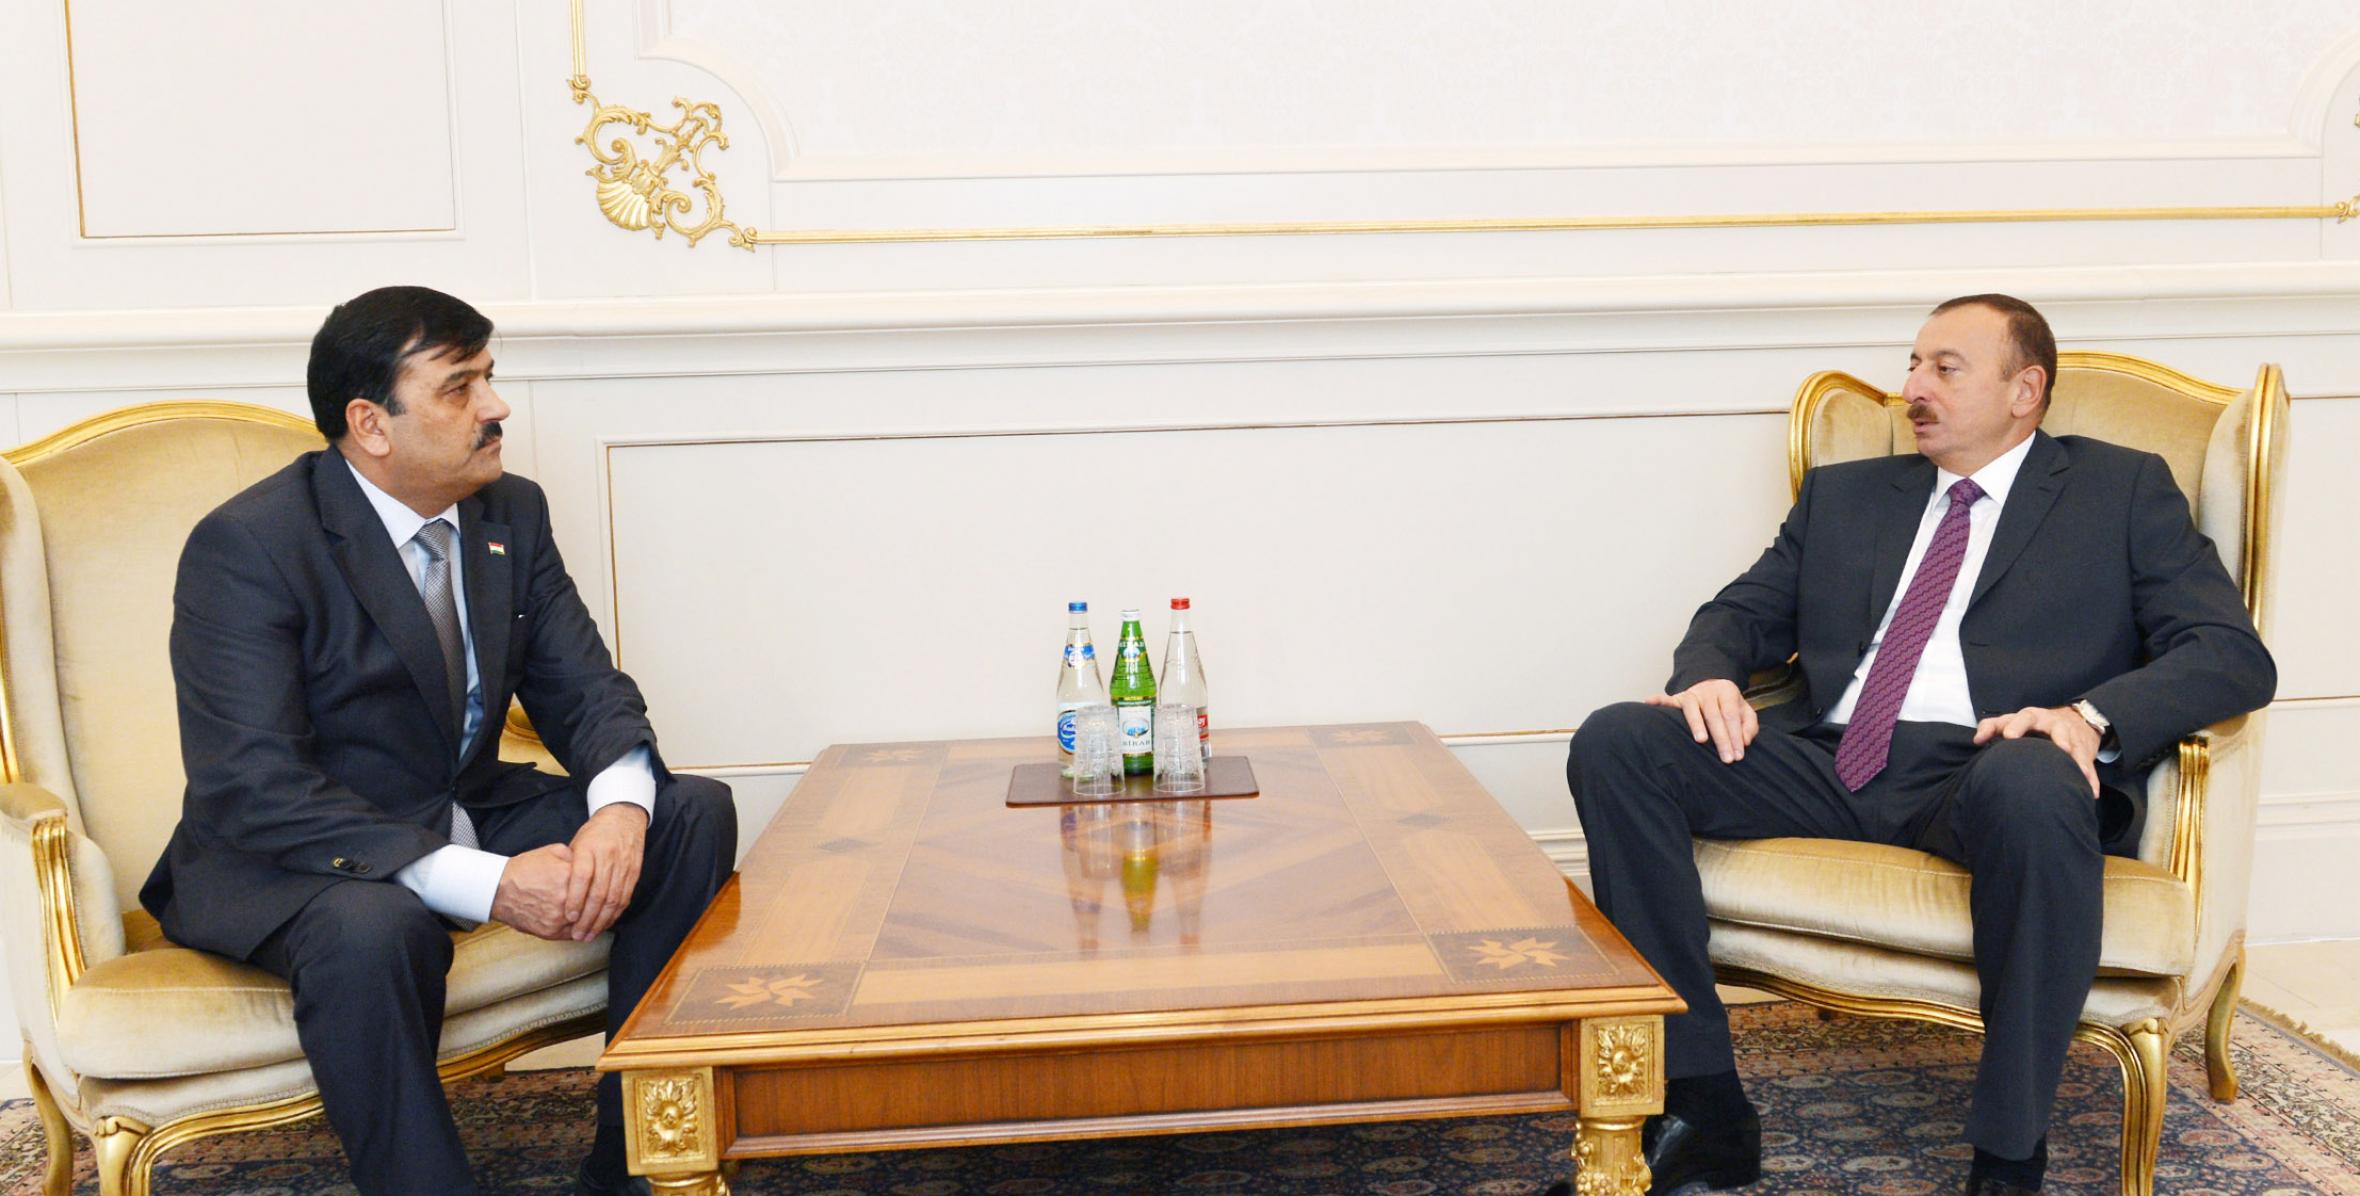 Ilham Aliyev accepted the credentials of a newly appointed Ambassador of Tajikistan to Azerbaijan